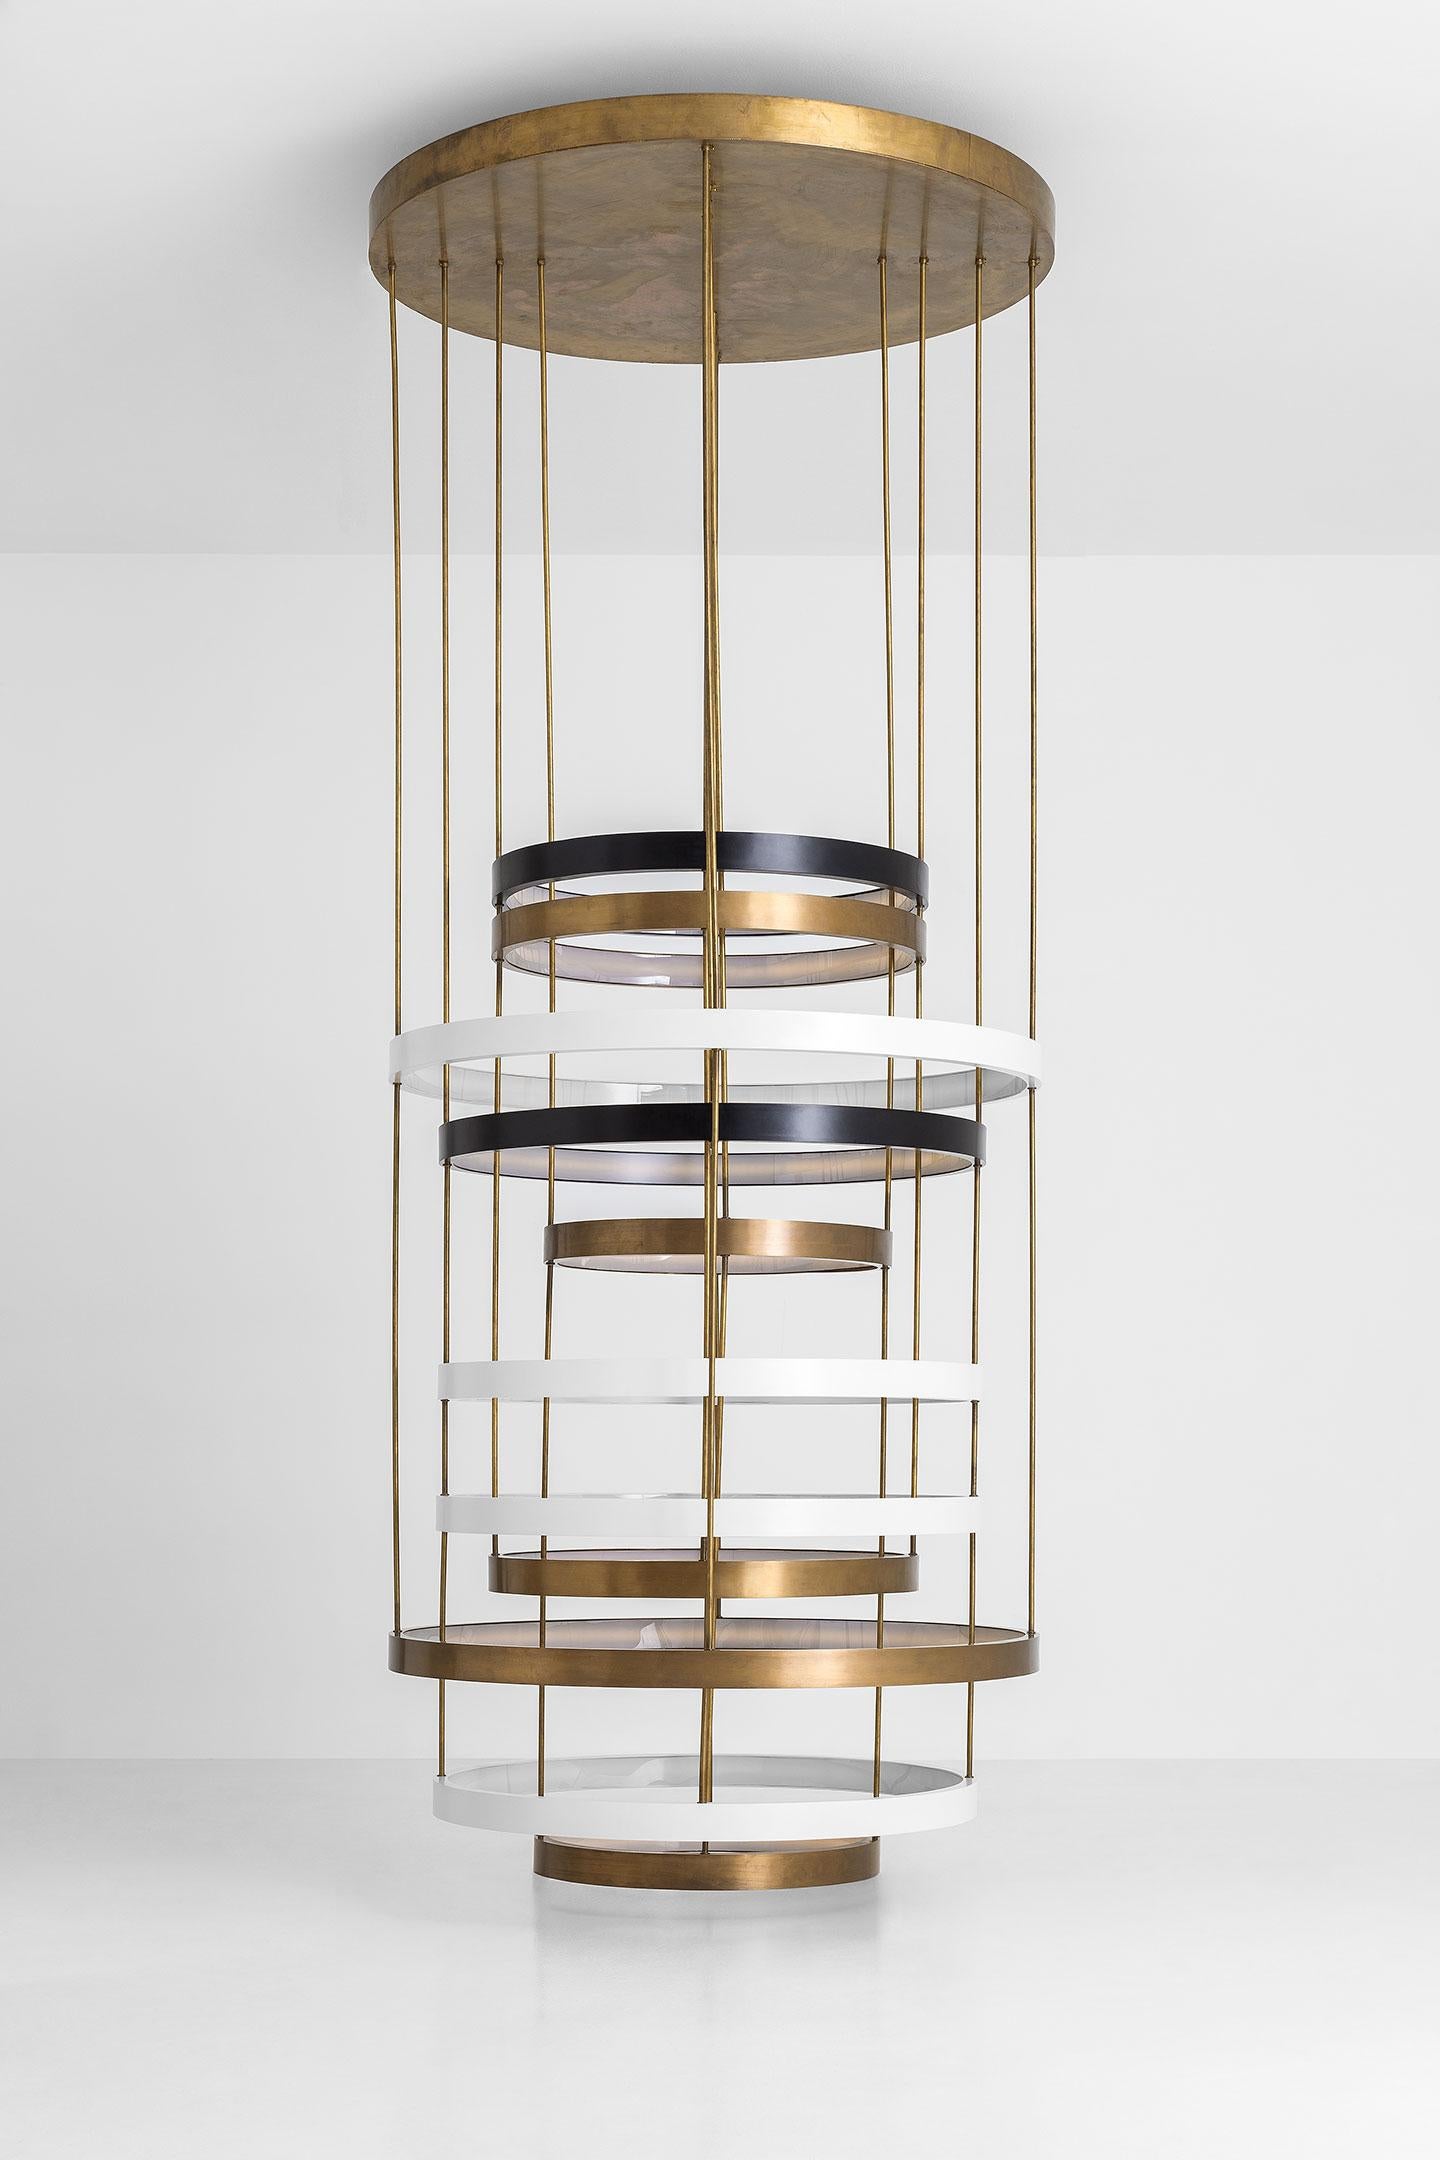 Ceiling lamp with oxidised brass and 11 painted brass rings.
Support tubes in oxidised brass. Light diffusor in opal perspex.
Dimoremilano collection.